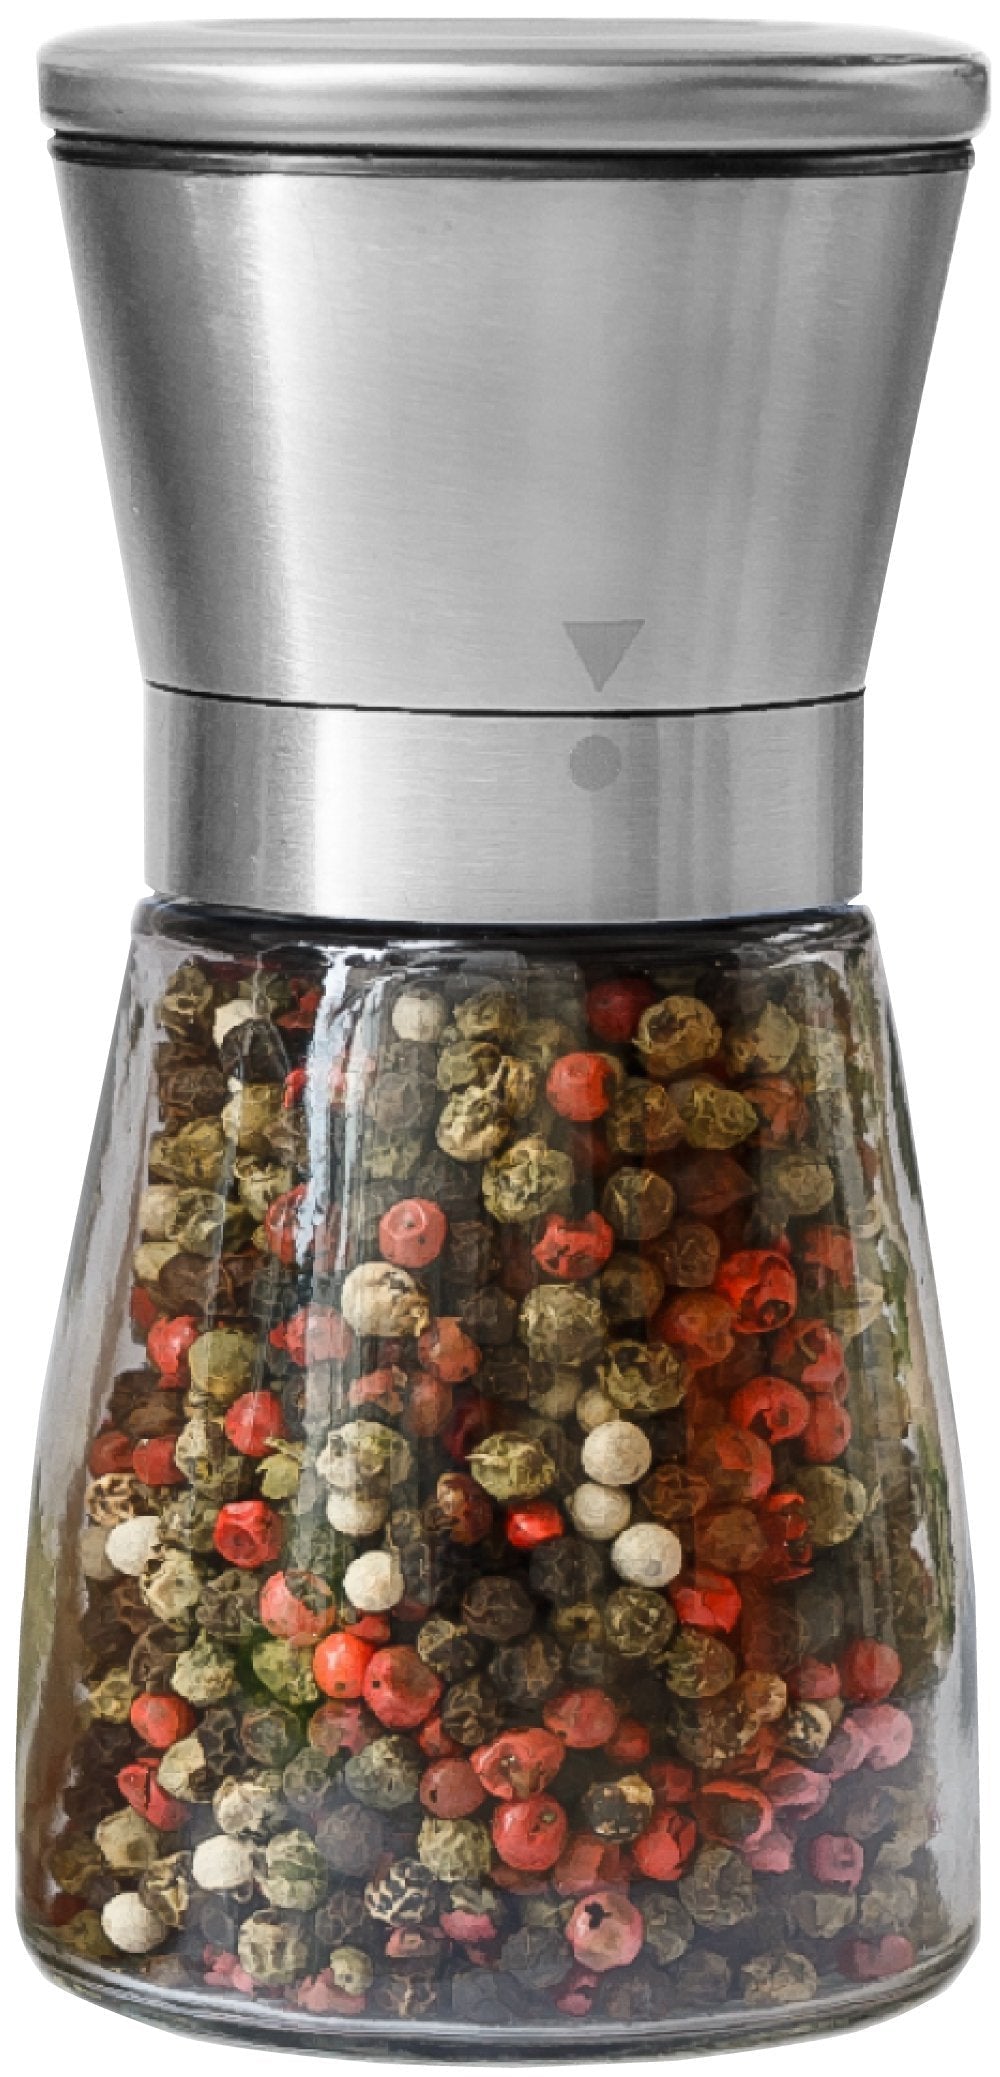  [AUSTRALIA] - Pepper Grinder or Salt Shaker for Professional Chef - Best Spice Mill with Brushed Stainless Steel, Special Mark, Ceramic Blades and Adjustable Coarseness 2.5'' x 5.5''